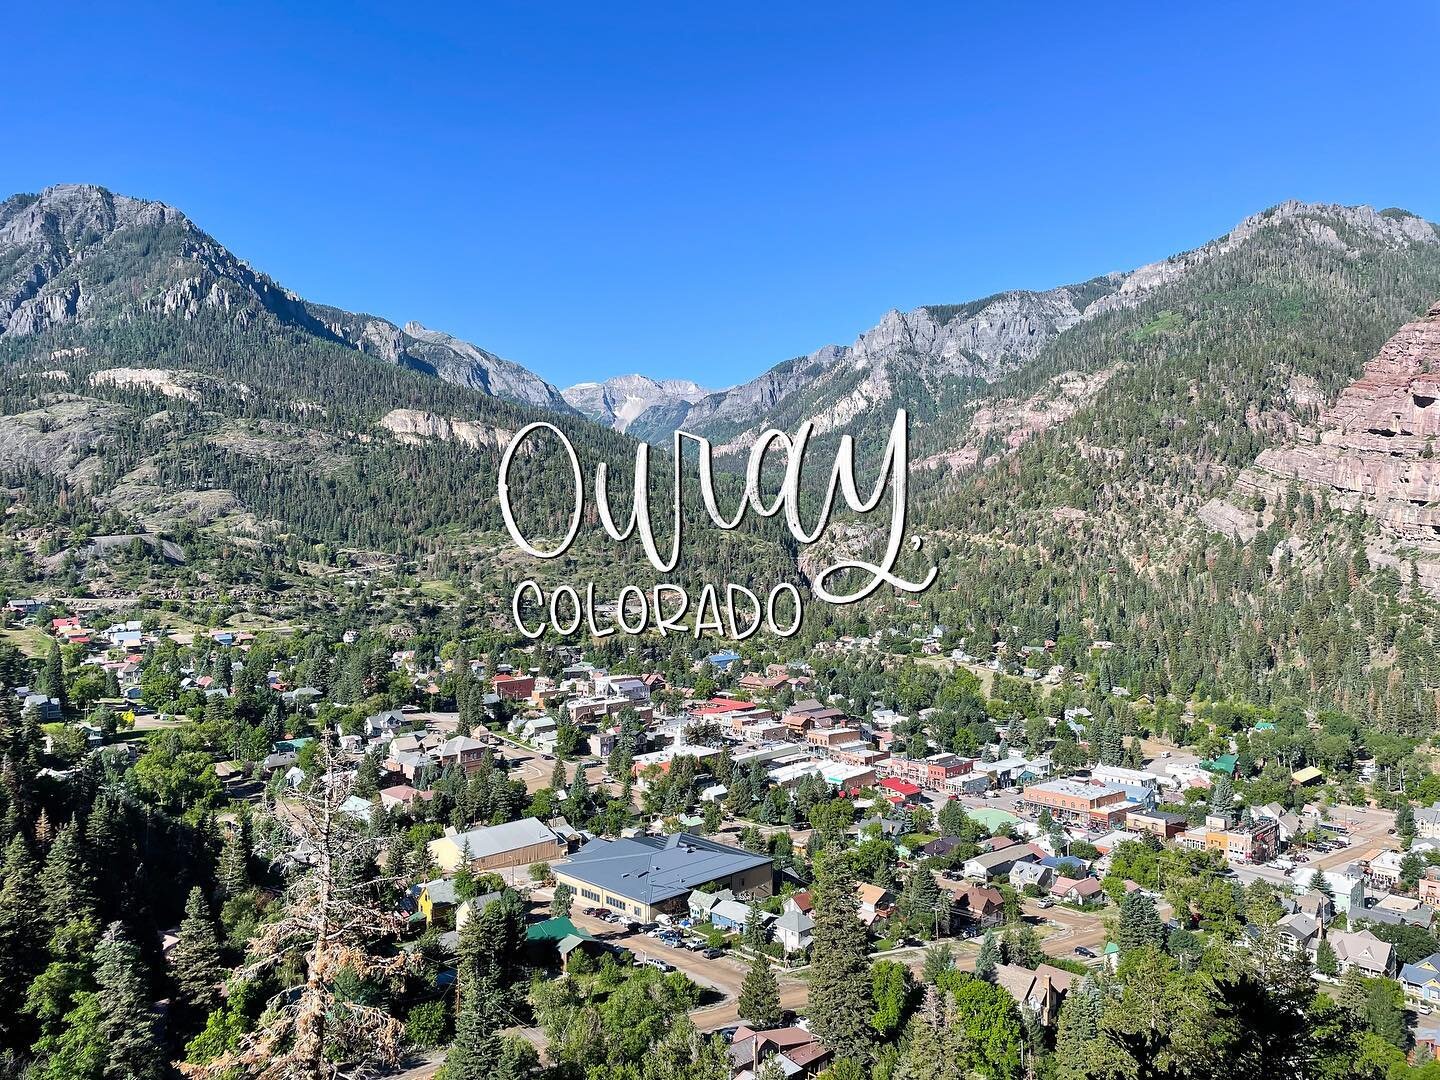 Ouray, Colorado.

We did the best hike today- a loop around Ouray. Highly recommend. There was constantly something gorgeous to look at!

Can&rsquo;t wait to use all this beauty to create some things when I get back! 🙌🏼